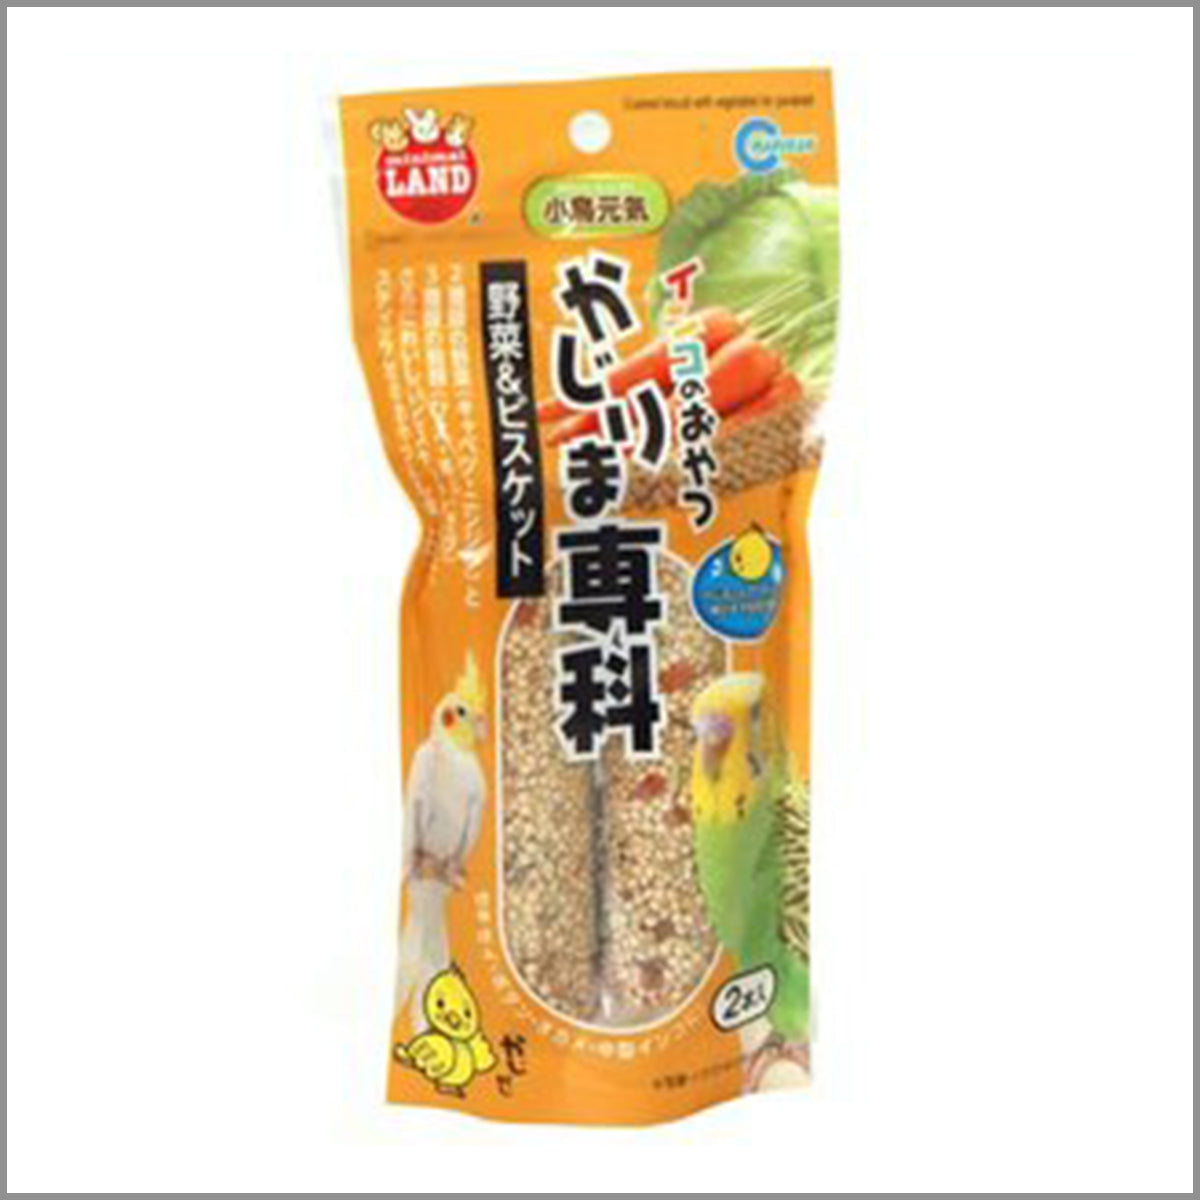 MARUKAN Parakeet snack vegetables and biscuits_蔬菜和餅乾零食